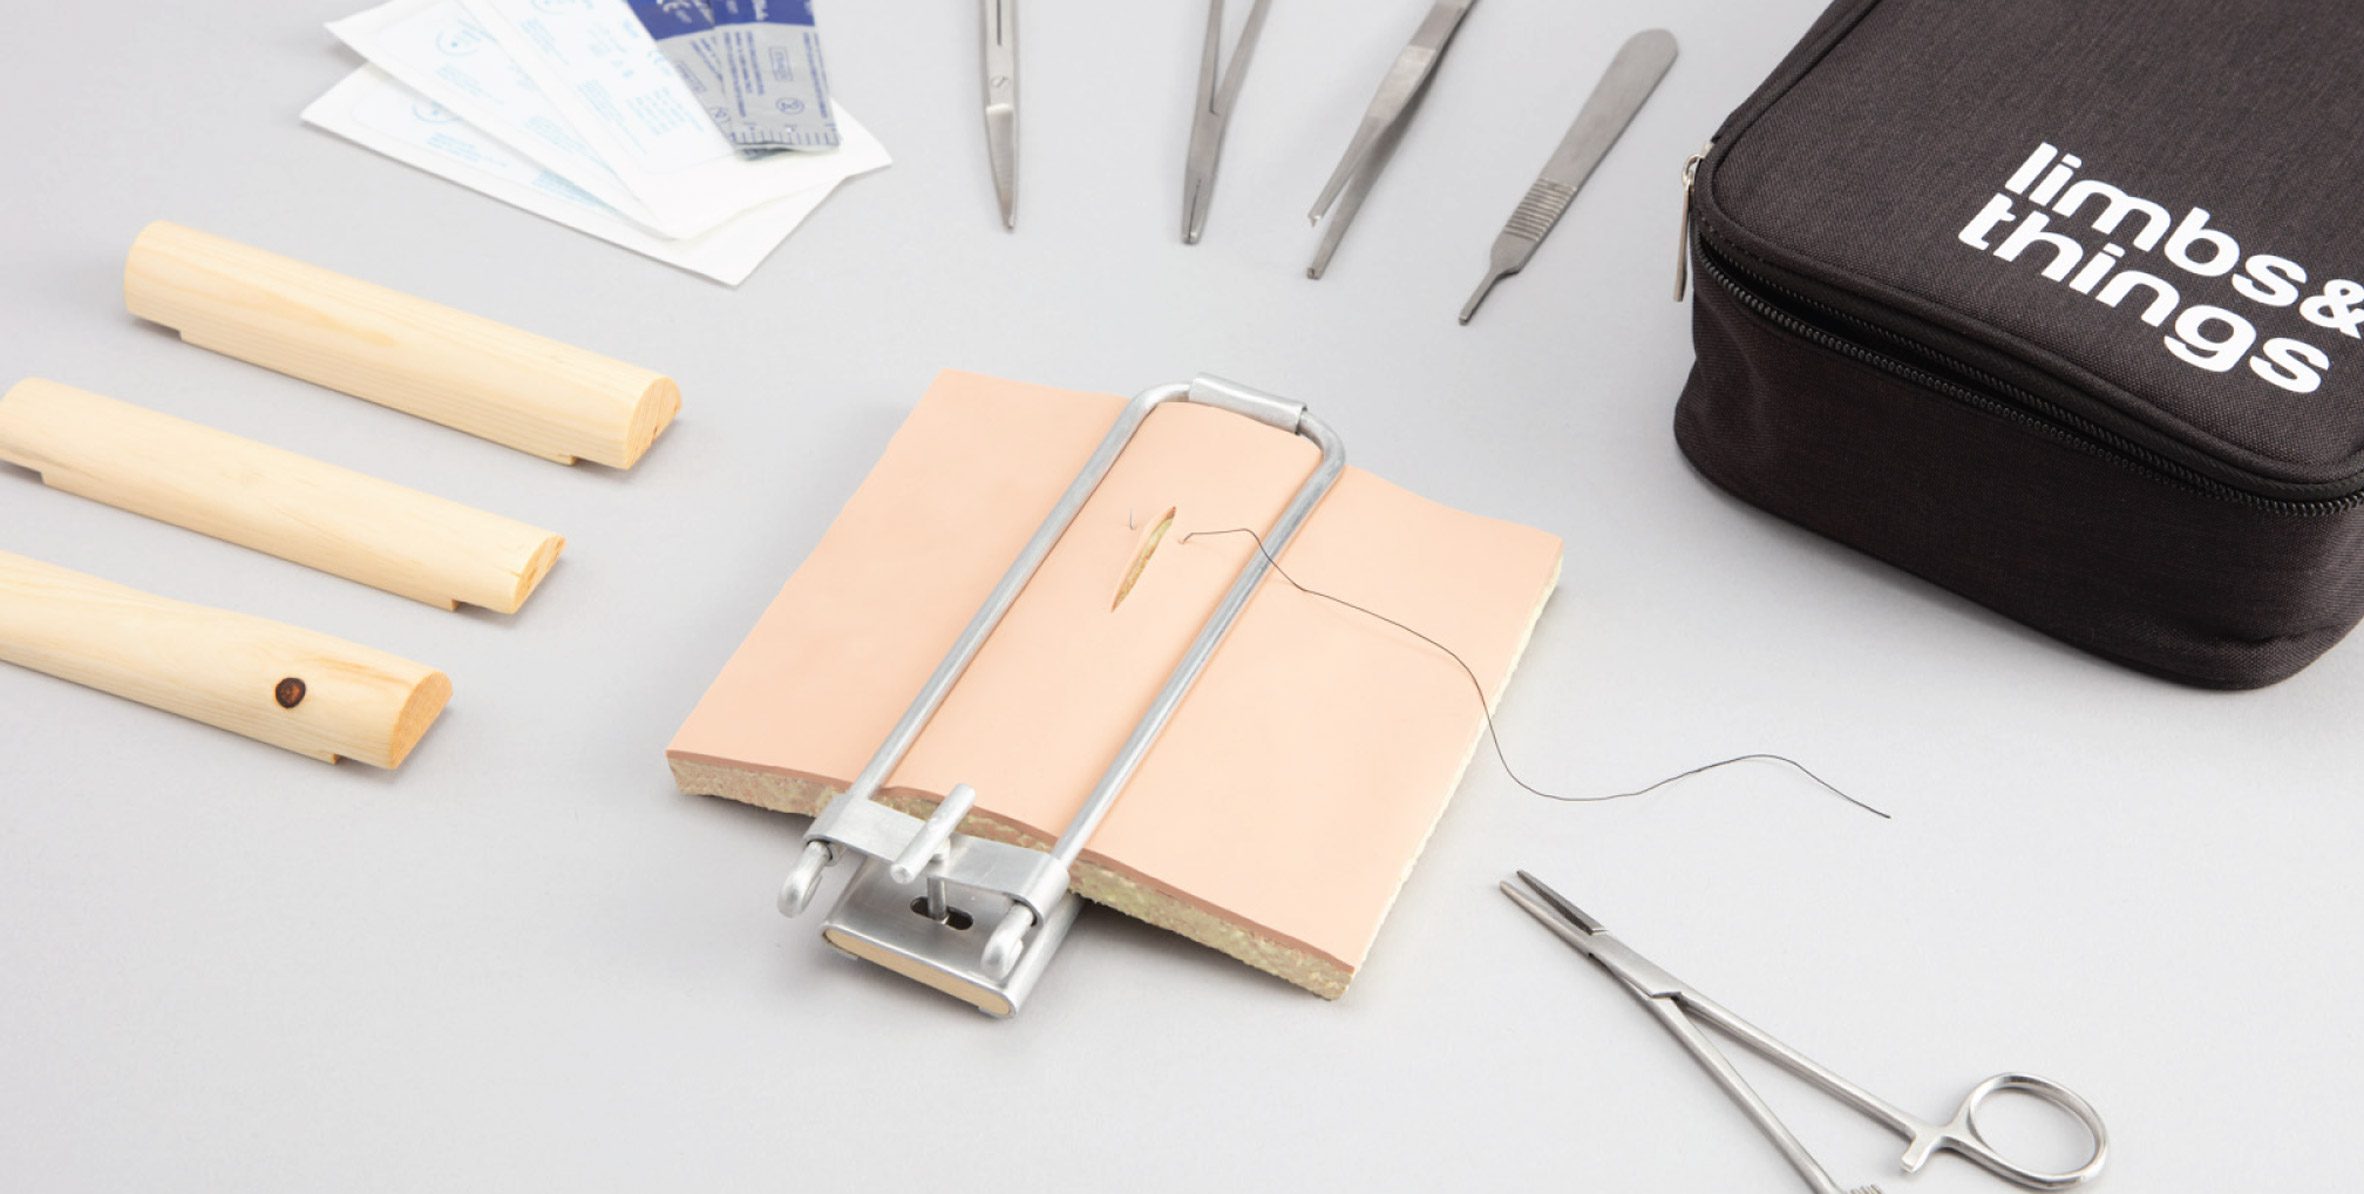 Recycled silicone suture pad surrounded by surgical tools